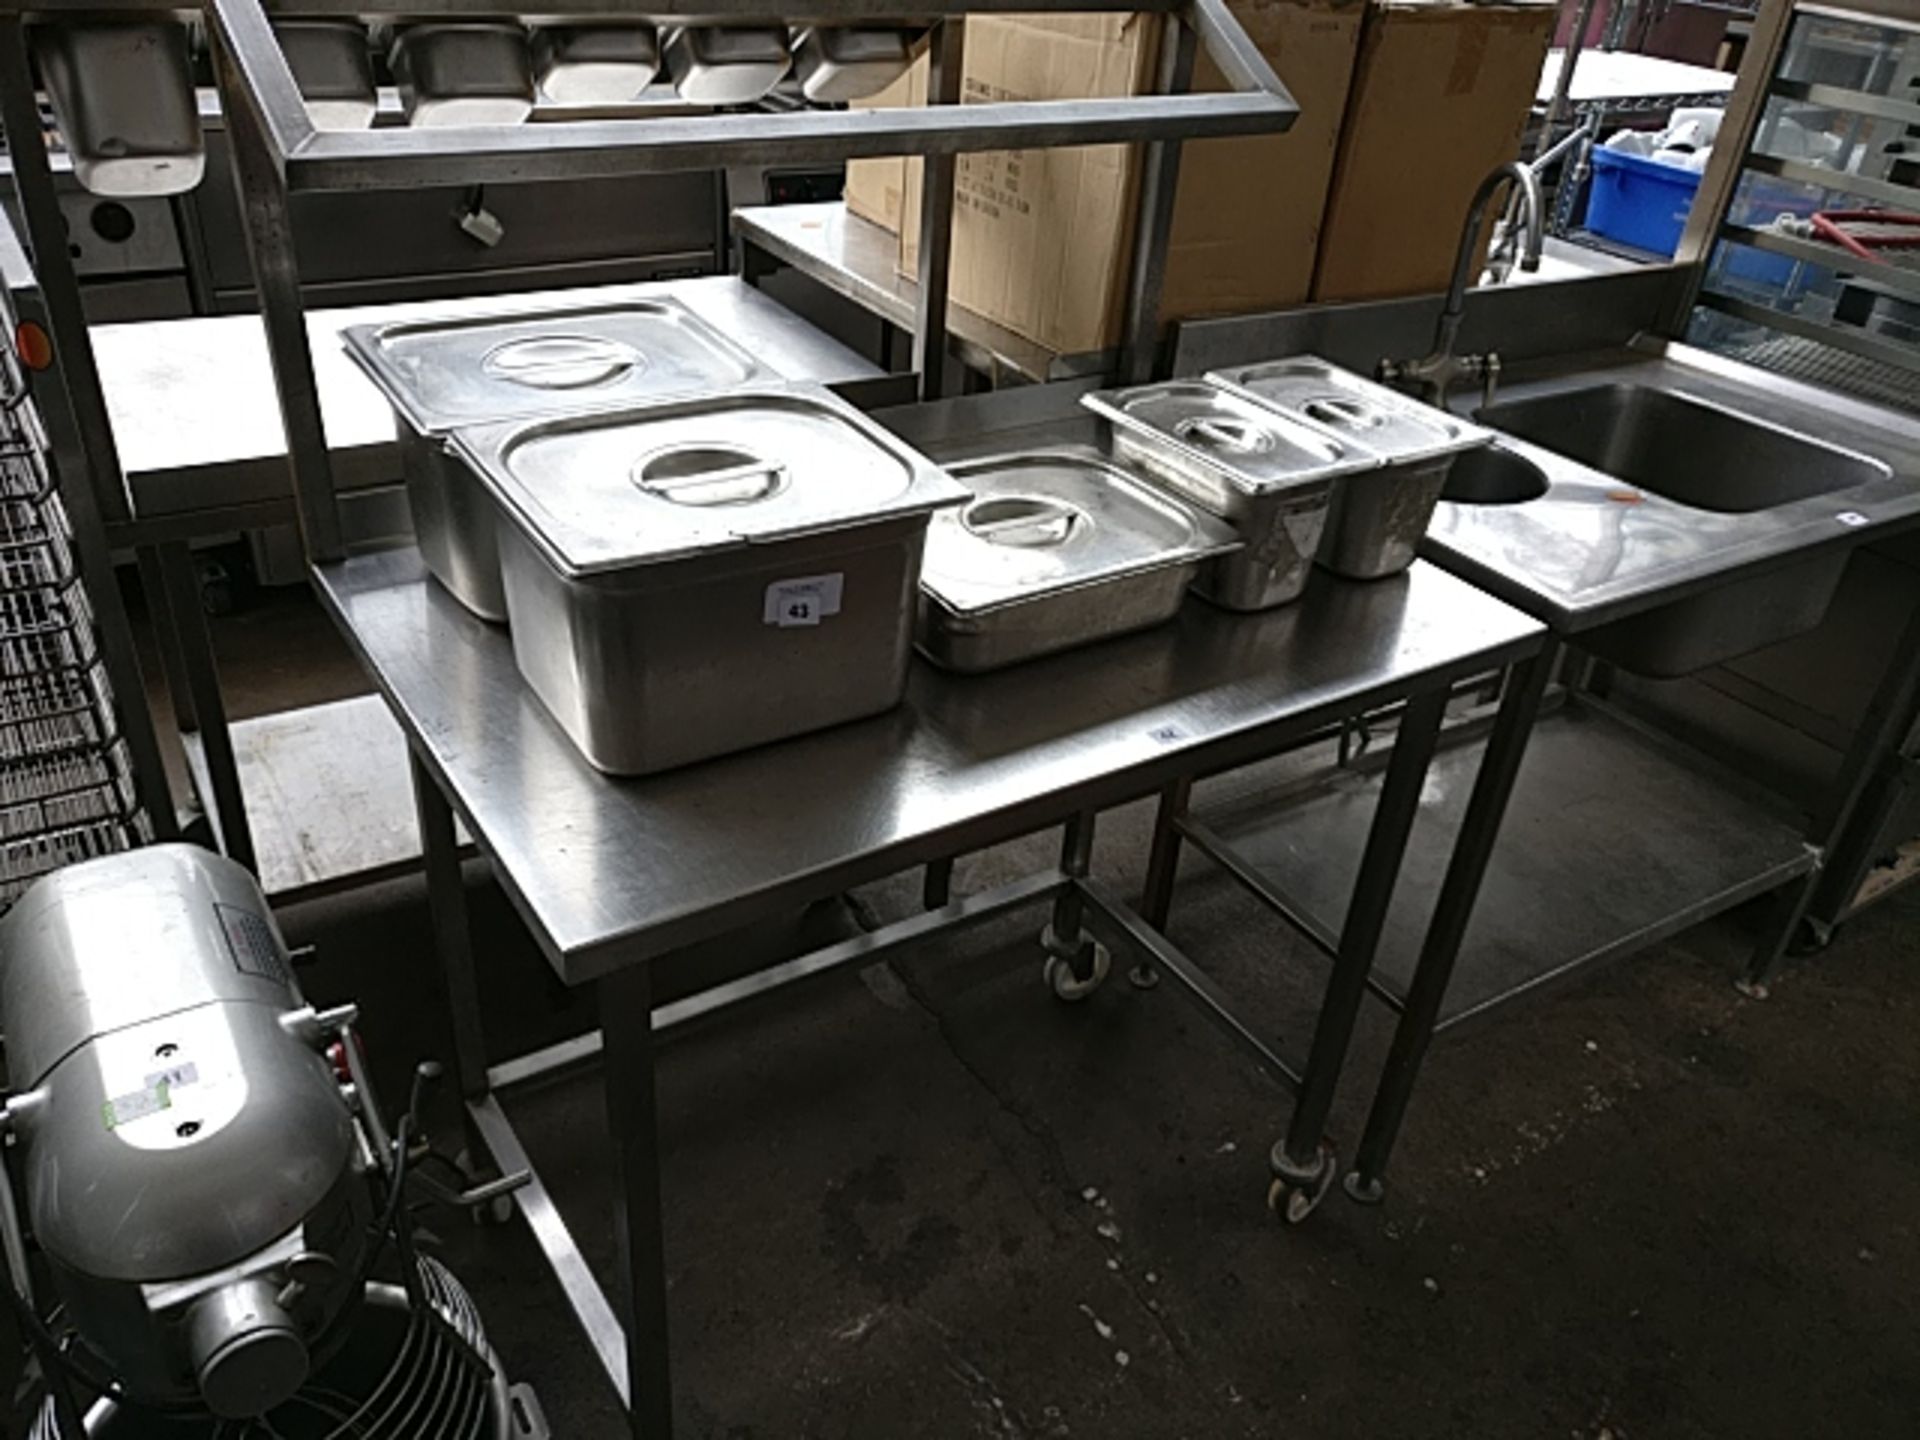 100cm stainless steel prep table on castors with salad bar top and shelf under